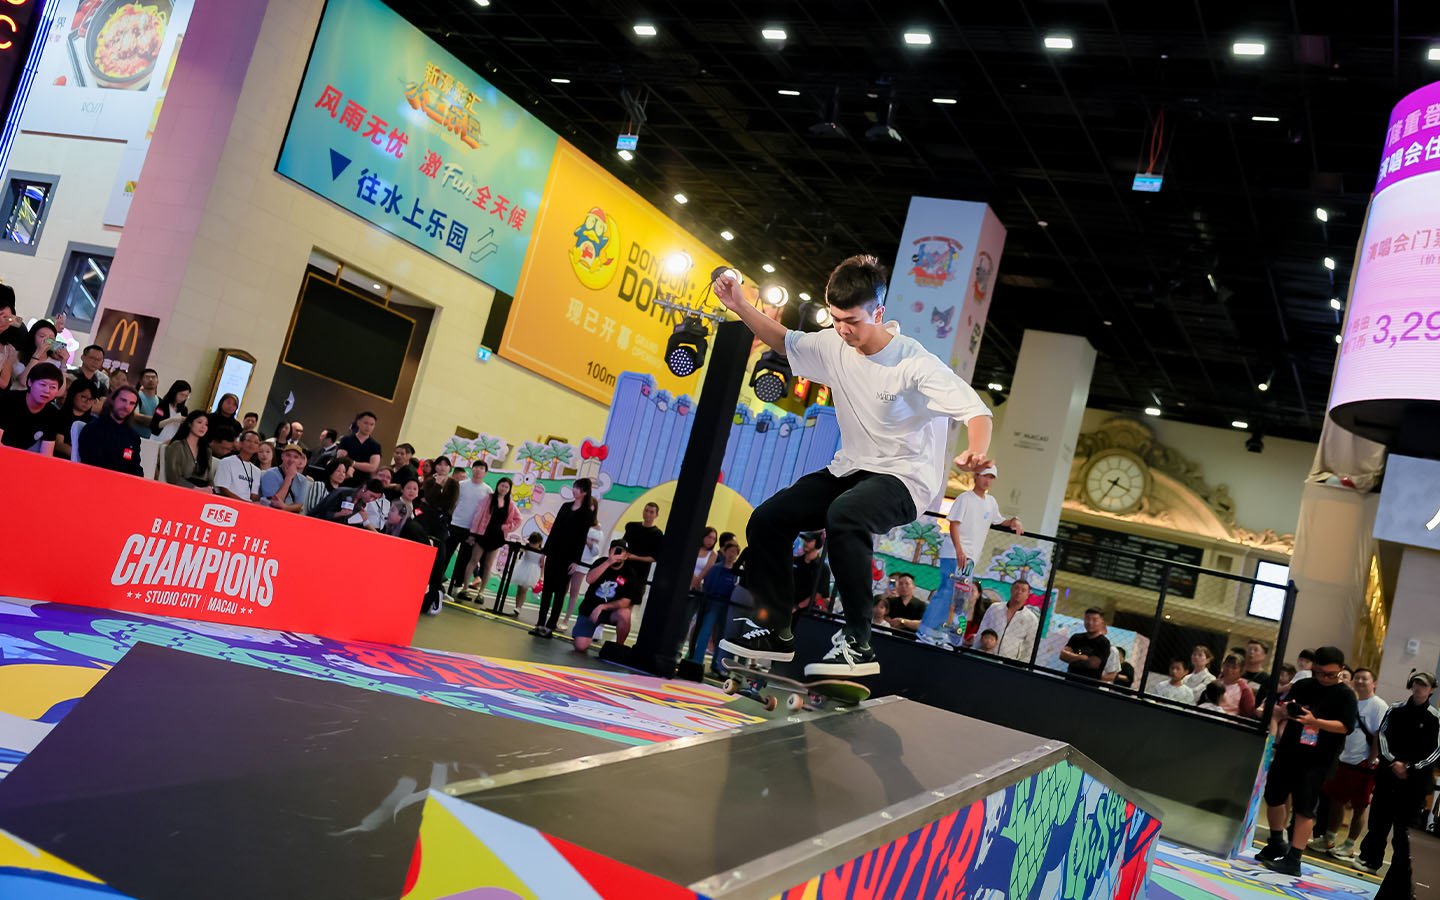 A world-renowned skateboarding competition is coming to Macao